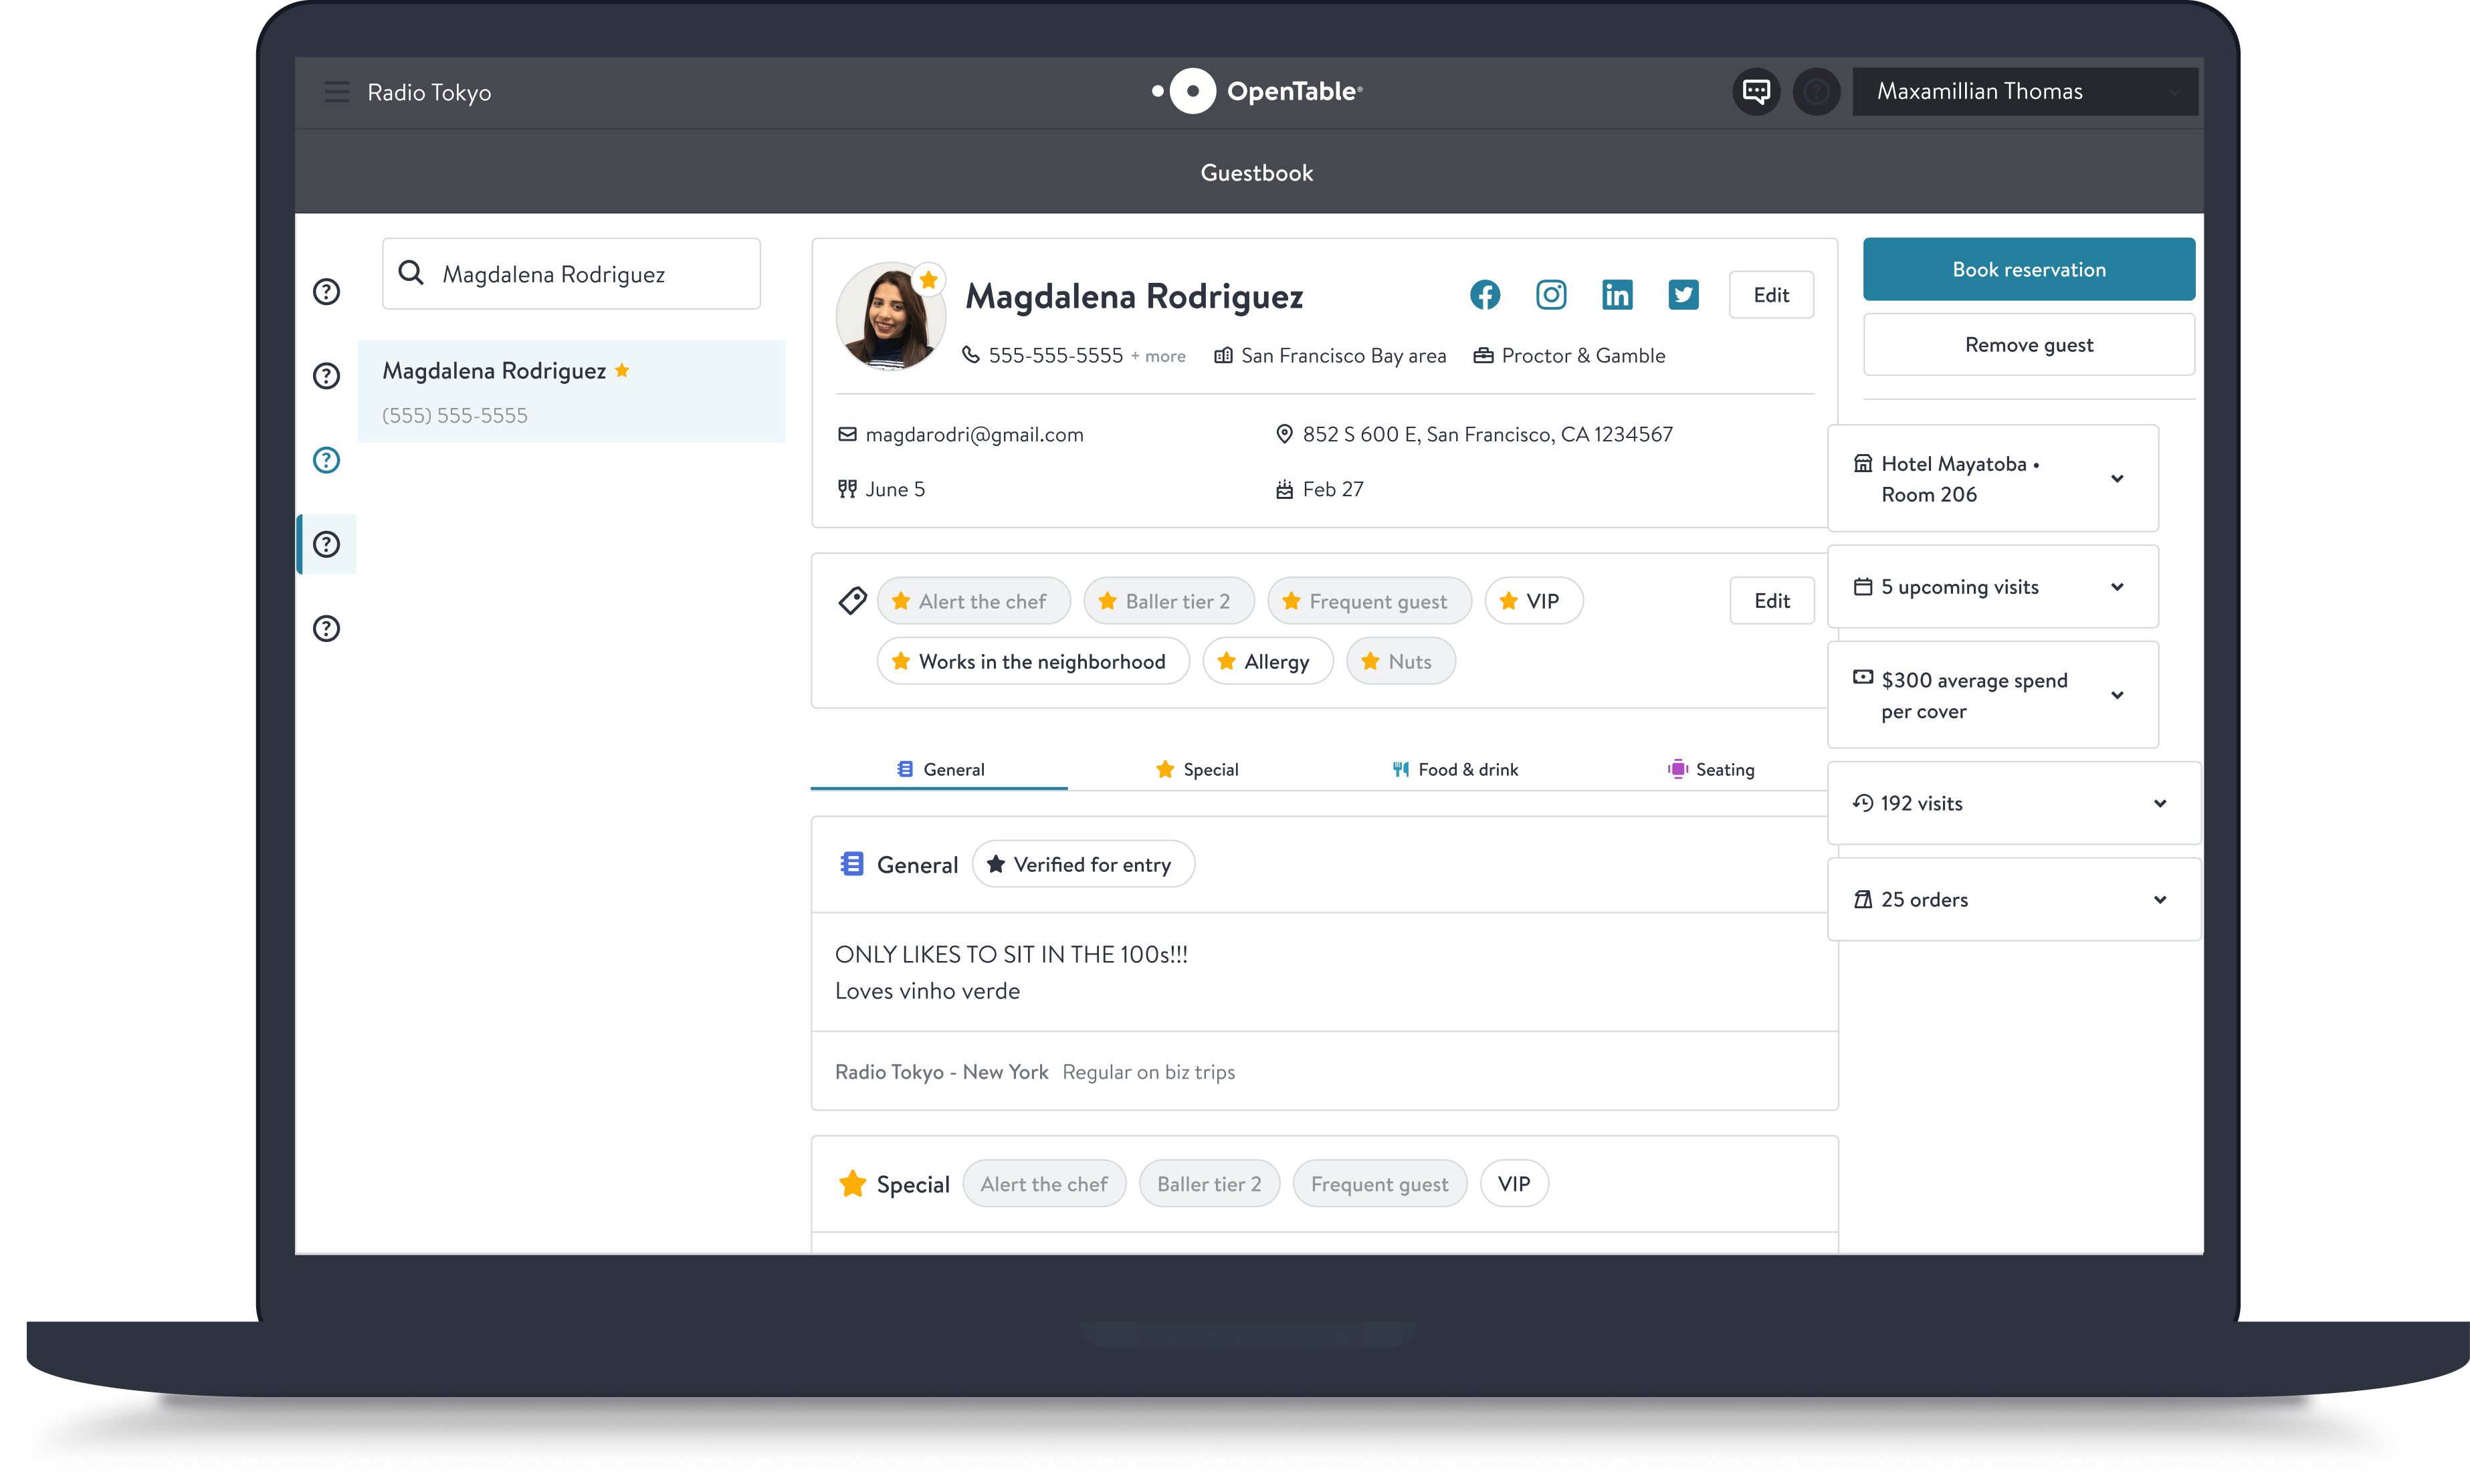 Organize and view all guest data in one place with guestbook. Get intel on guests across the platform, merge duplicate guest profiles, archive old or irrelevant profiles so staff can find the right guests, and more.